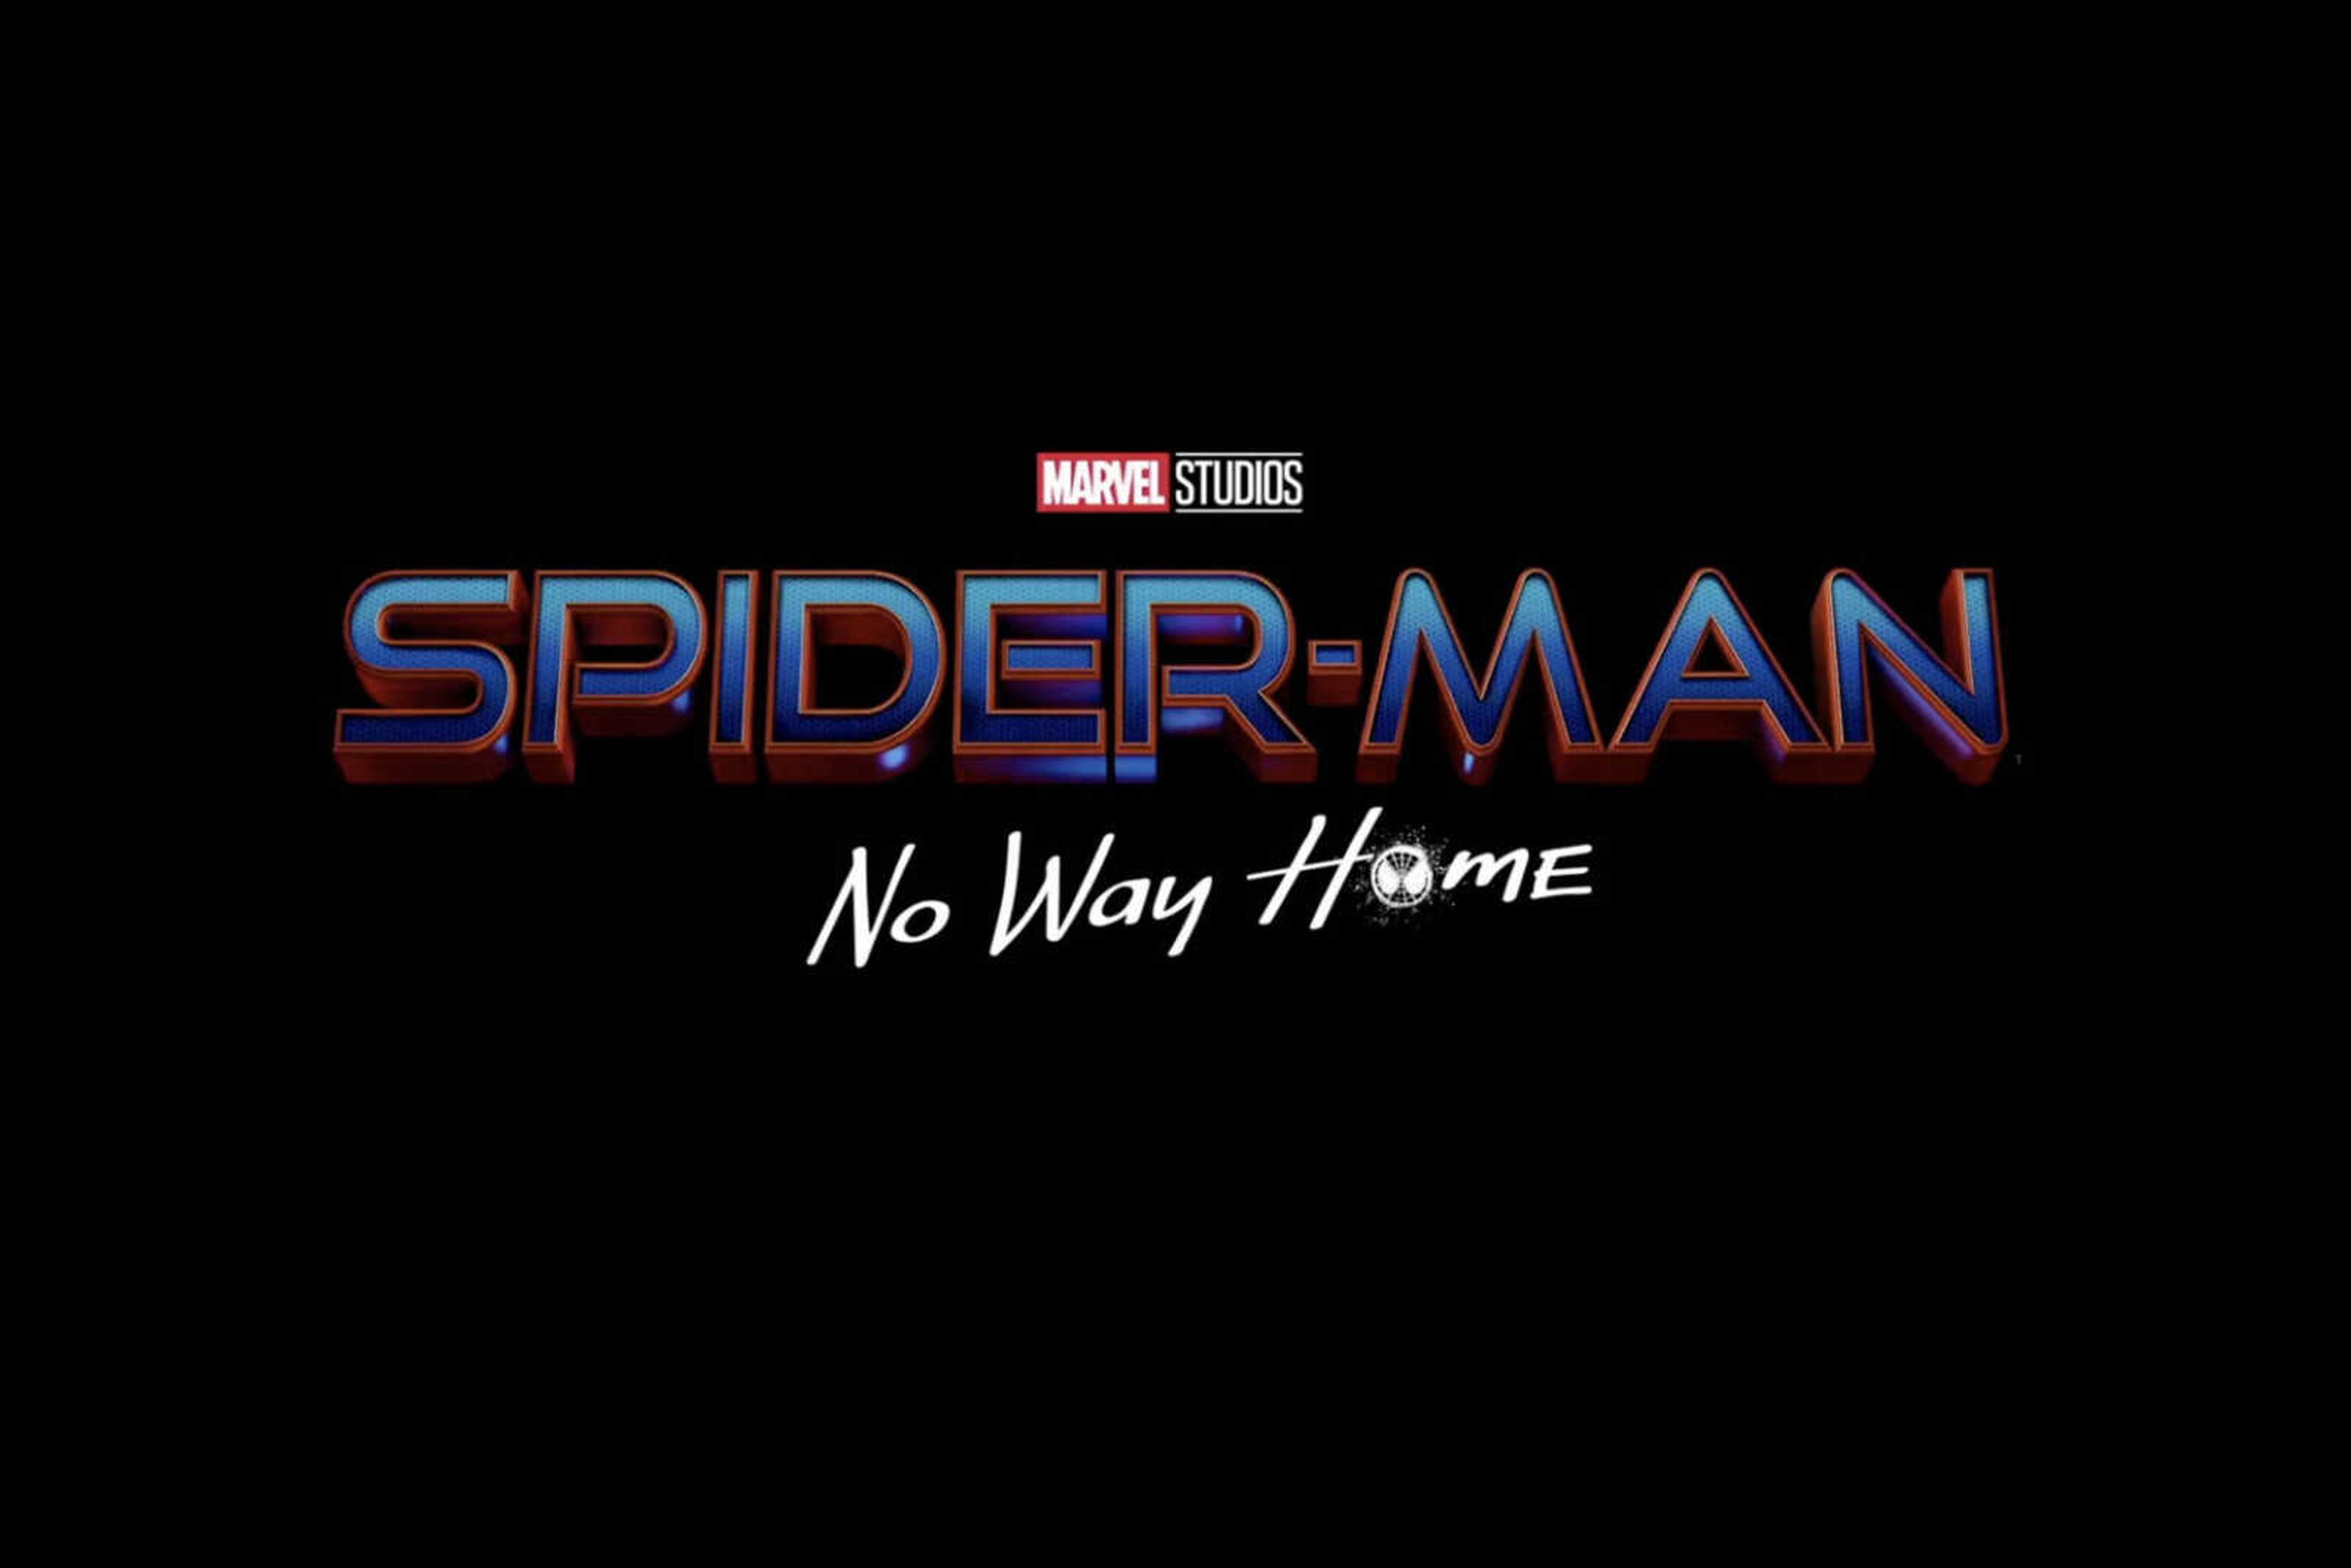 Title card for the upcoming Spider-Man movie "No Way Home." The movie is expected to be in theaters December 2021.